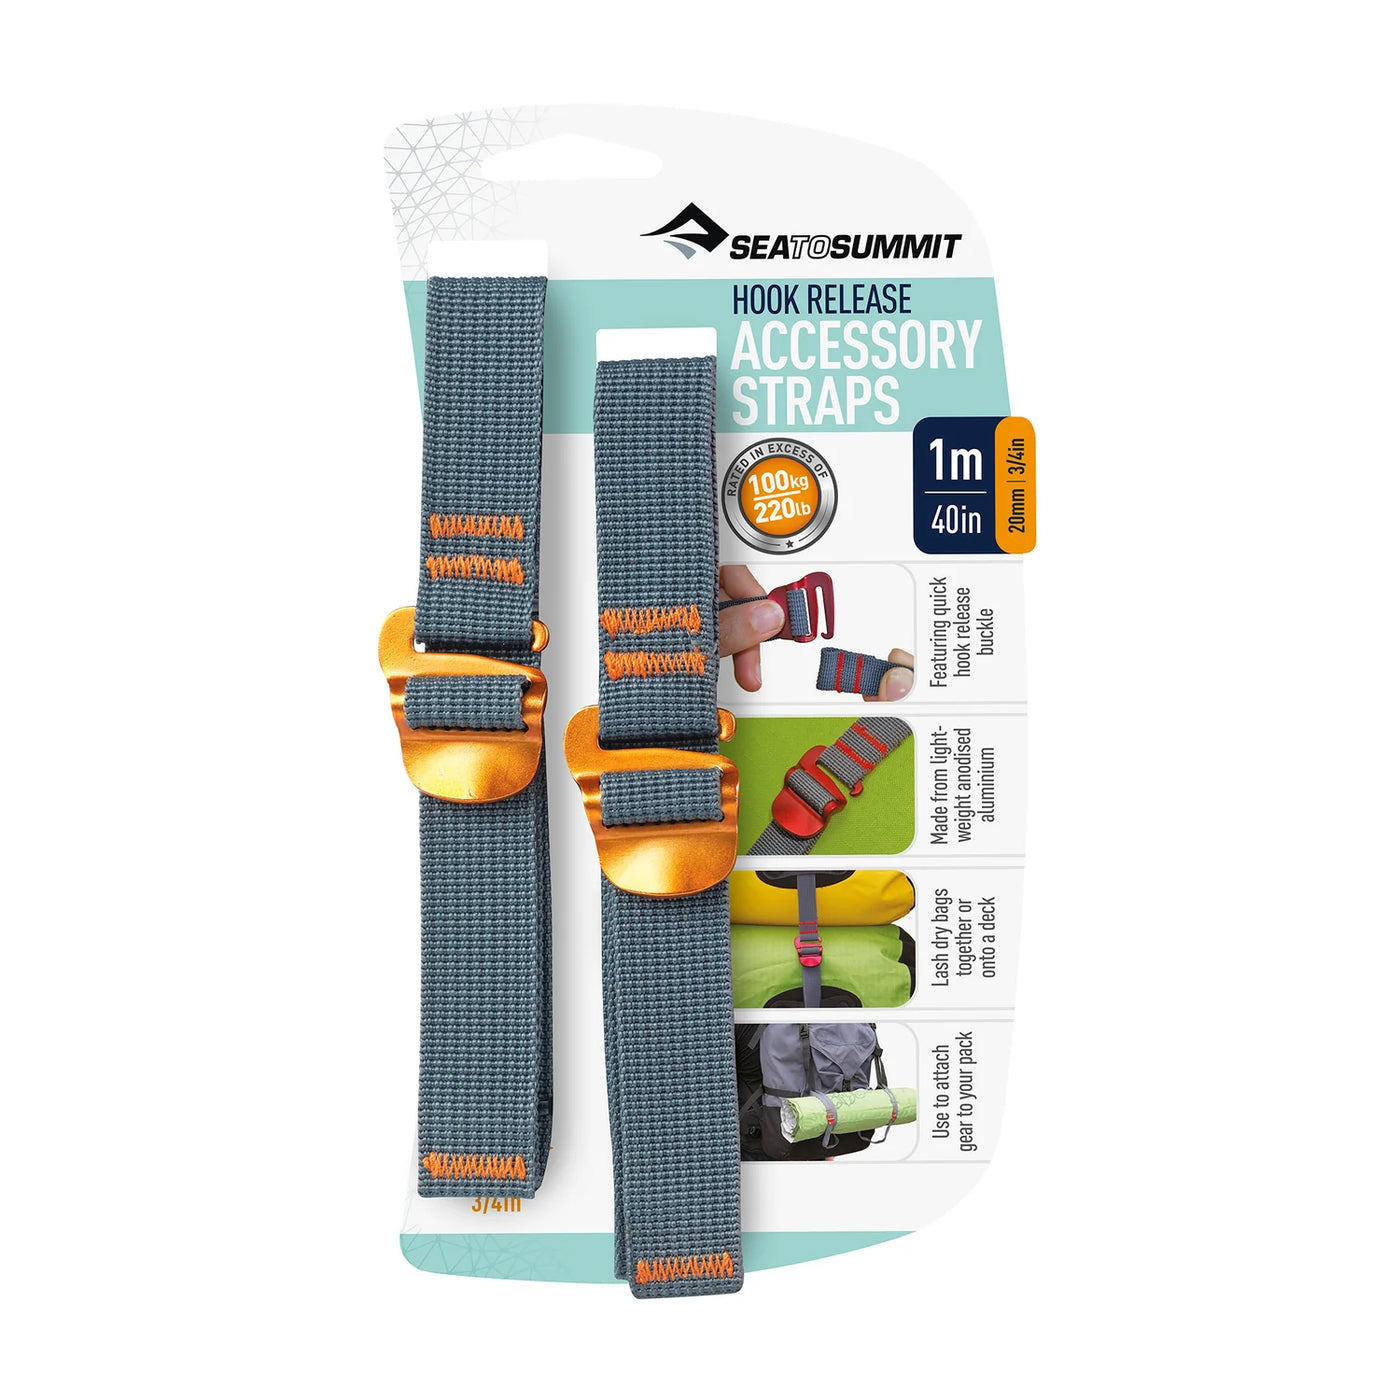 Sea to Summit Accessory Straps with Hook Release 20mm